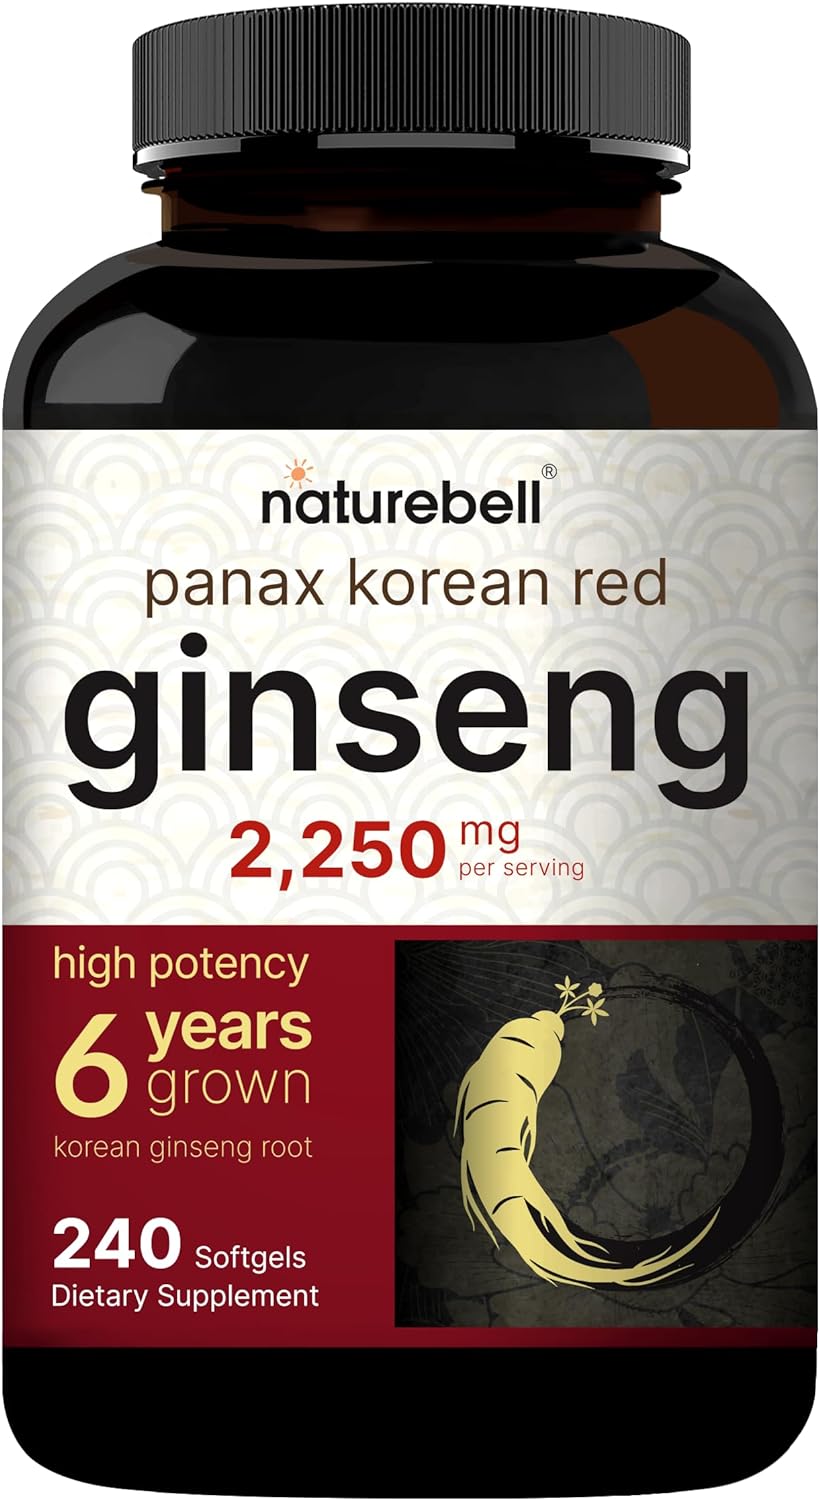 Korean Red Ginseng 2,250mg Per Serving, 240* Softgels | Panax Ginseng Root, Standardized to 10% Ginsenosides, Non-GMO, Support Energy, Male Performance, & Immune System